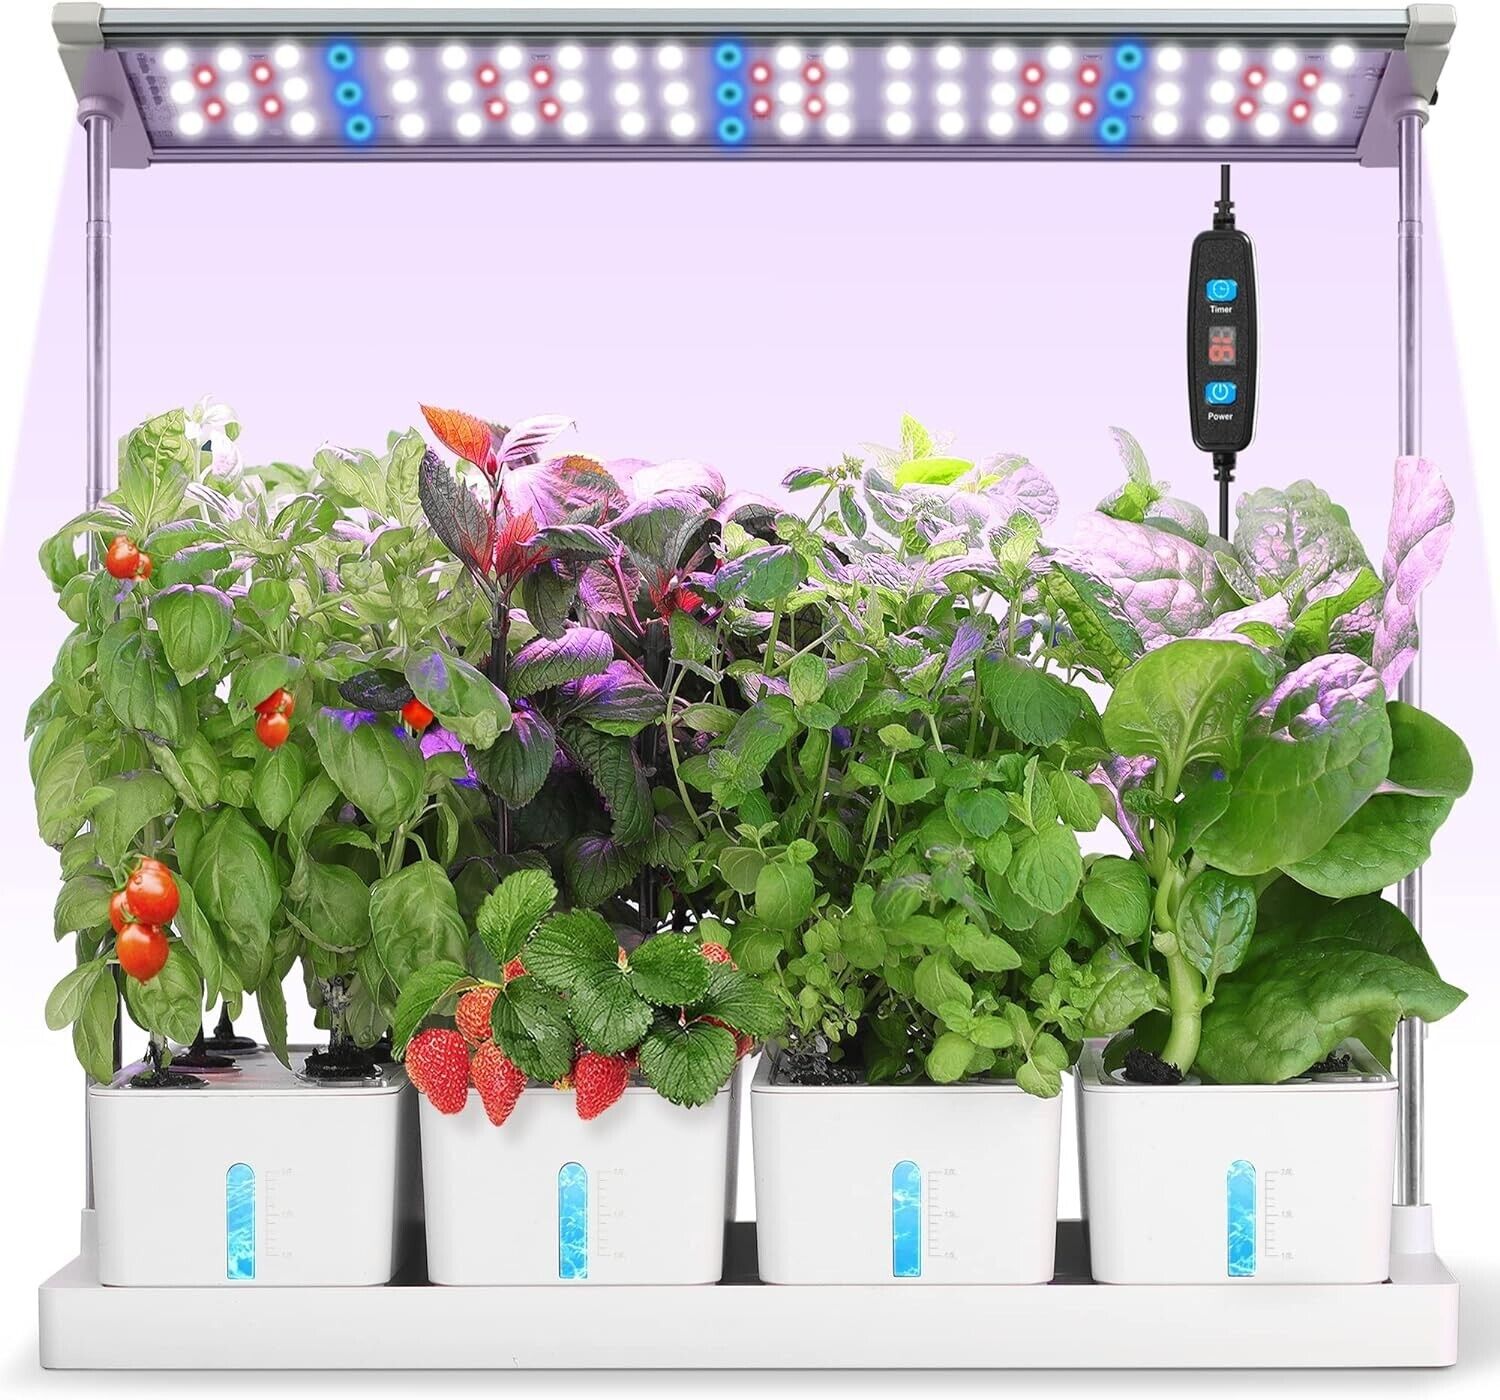 20 Pods Hydroponics Growing System Timer with LED Grow Light Indoor Herb Garden